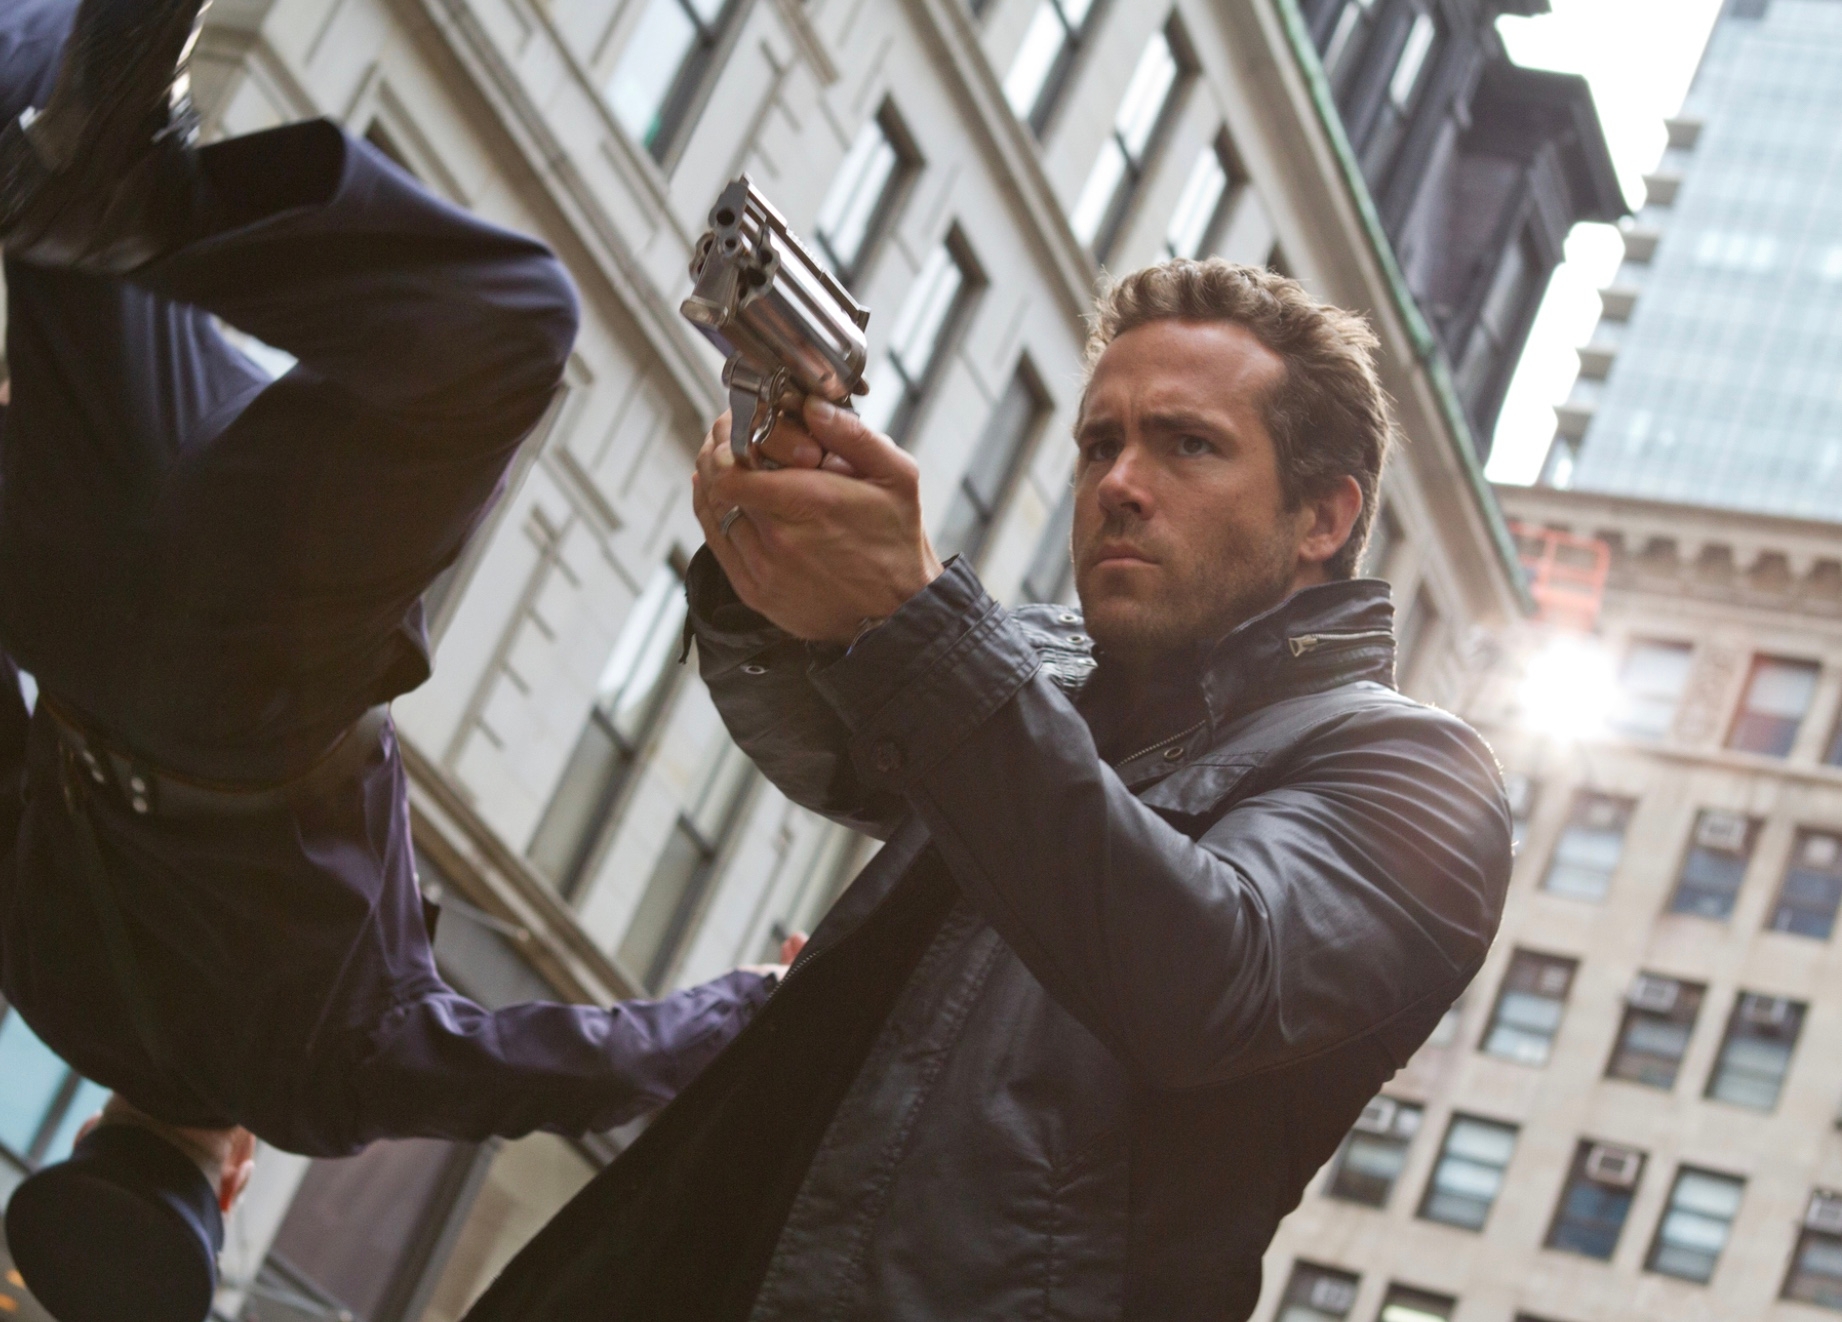 R.I.P.D: One of Ryan Reynolds' worst movies is bizarrely getting a